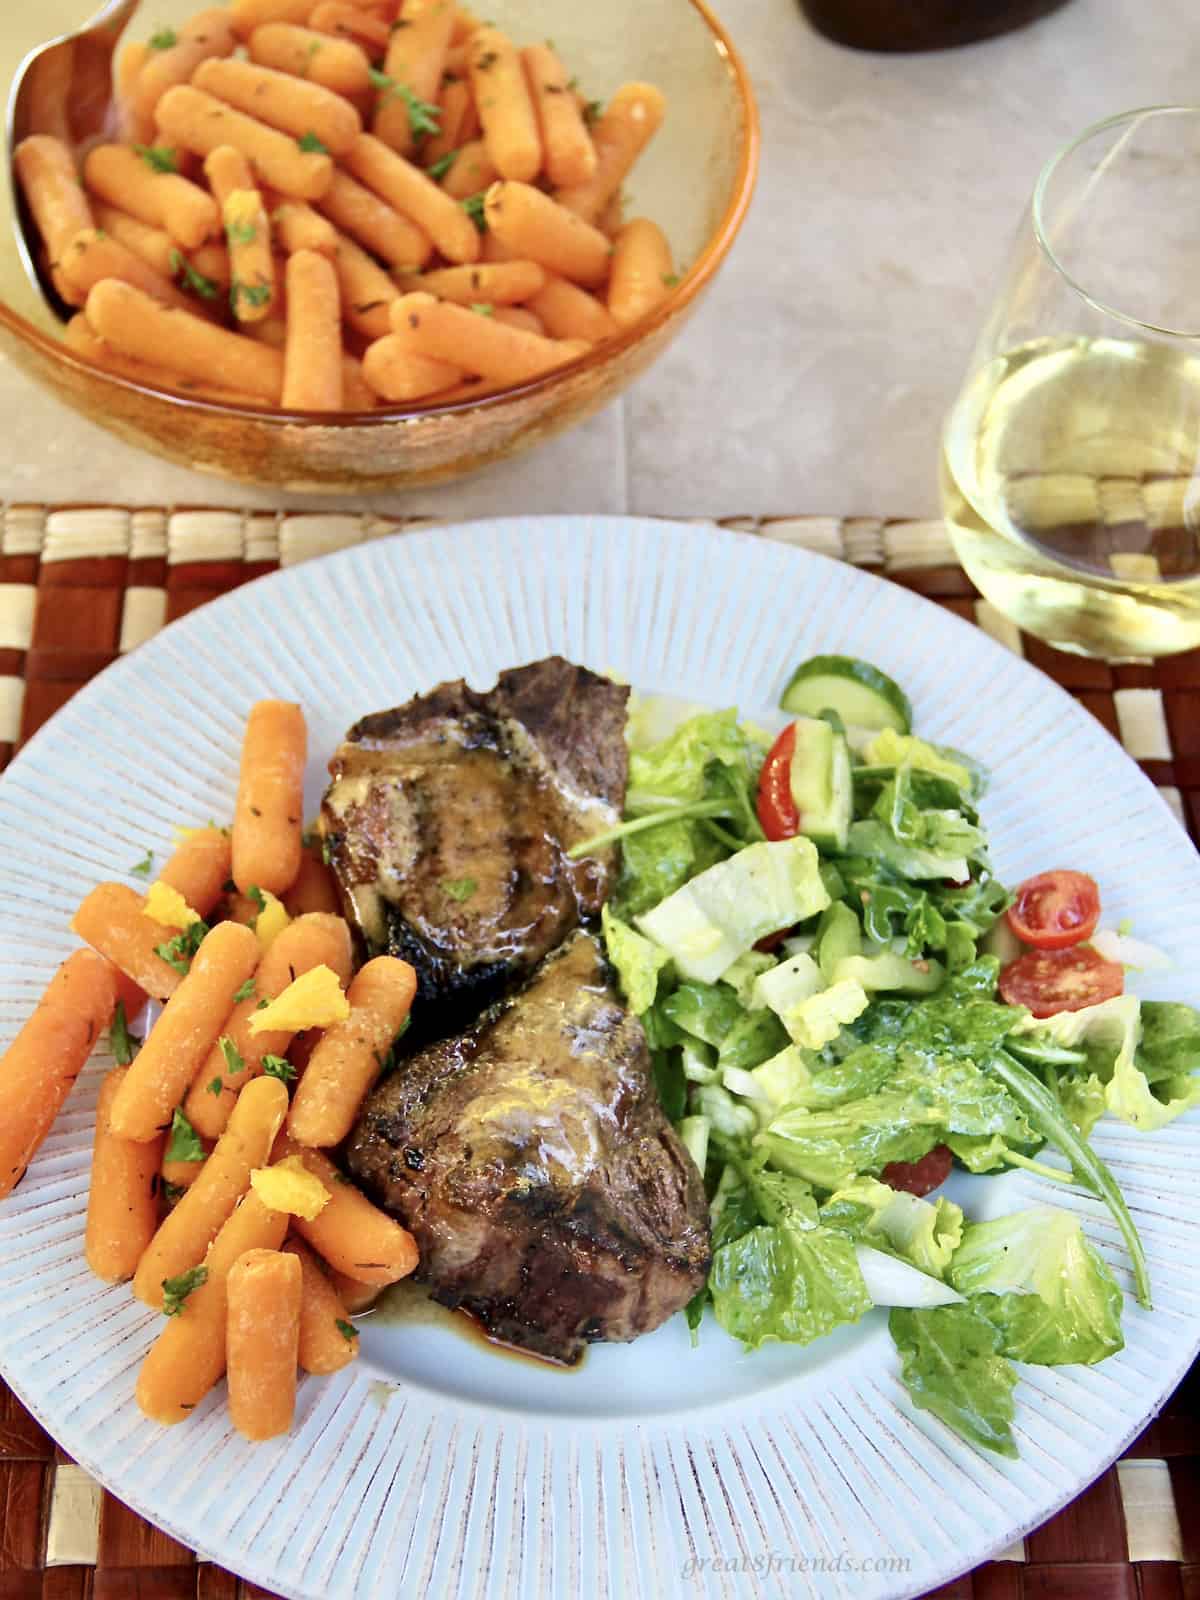 Two grilled lamb chops on a plate with orange baby carrots and a side salad with a bowl of carrots and a glass of white wine on the side.